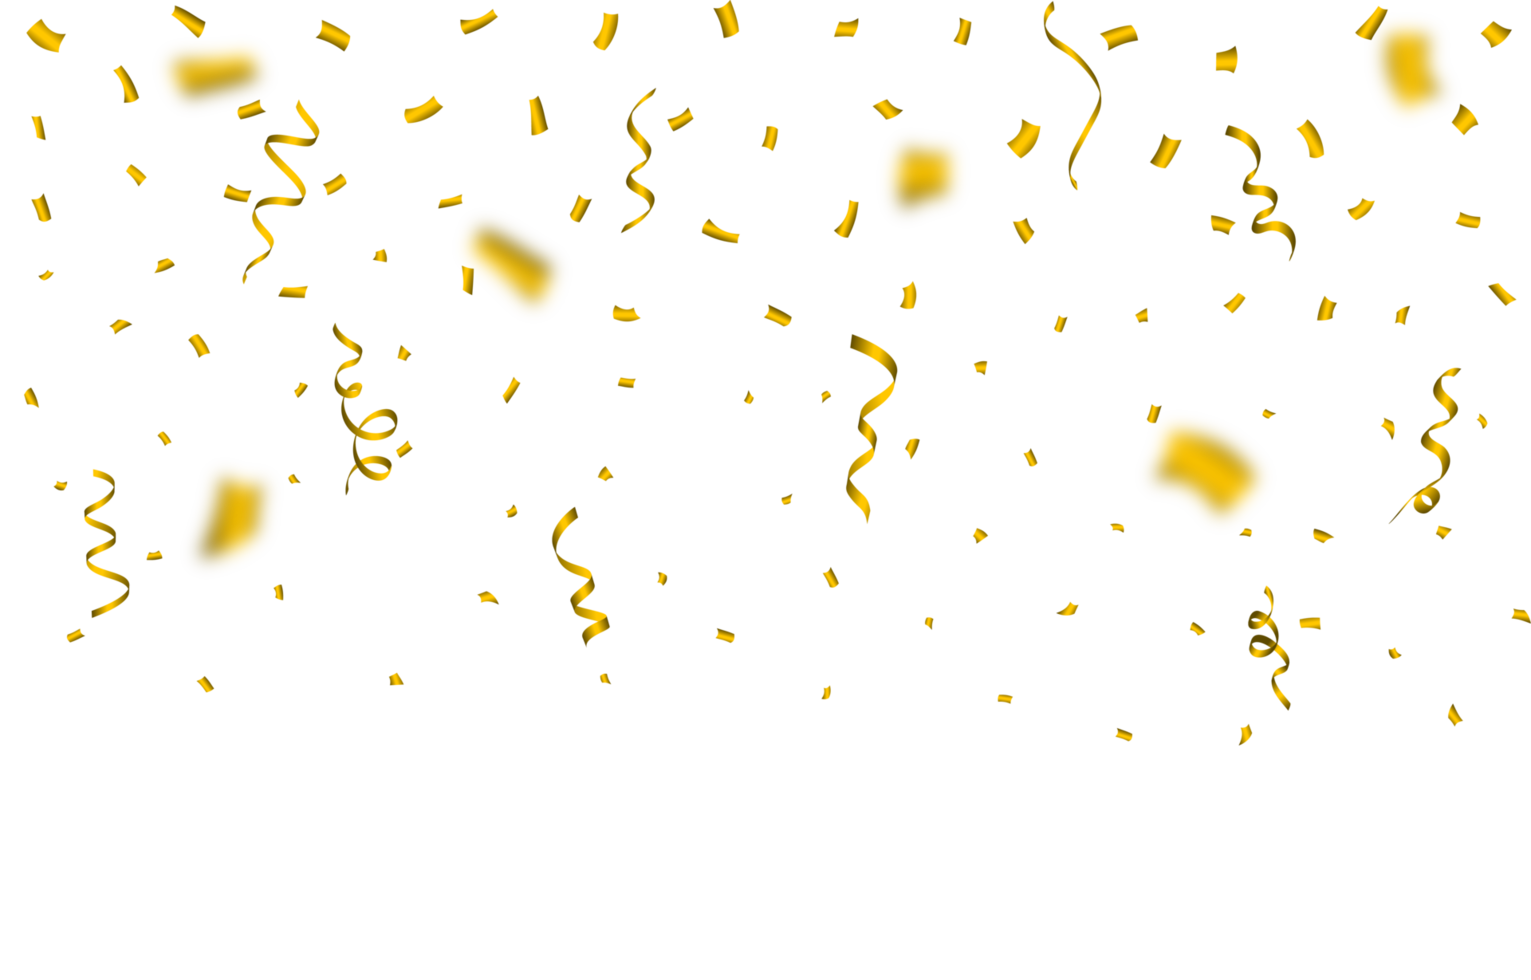 Confetti PNG illustration for the carnival background. Golden party tinsel and confetti falling. Golden confetti isolated on a transparent background. Festival elements PNG. Birthday celebration.